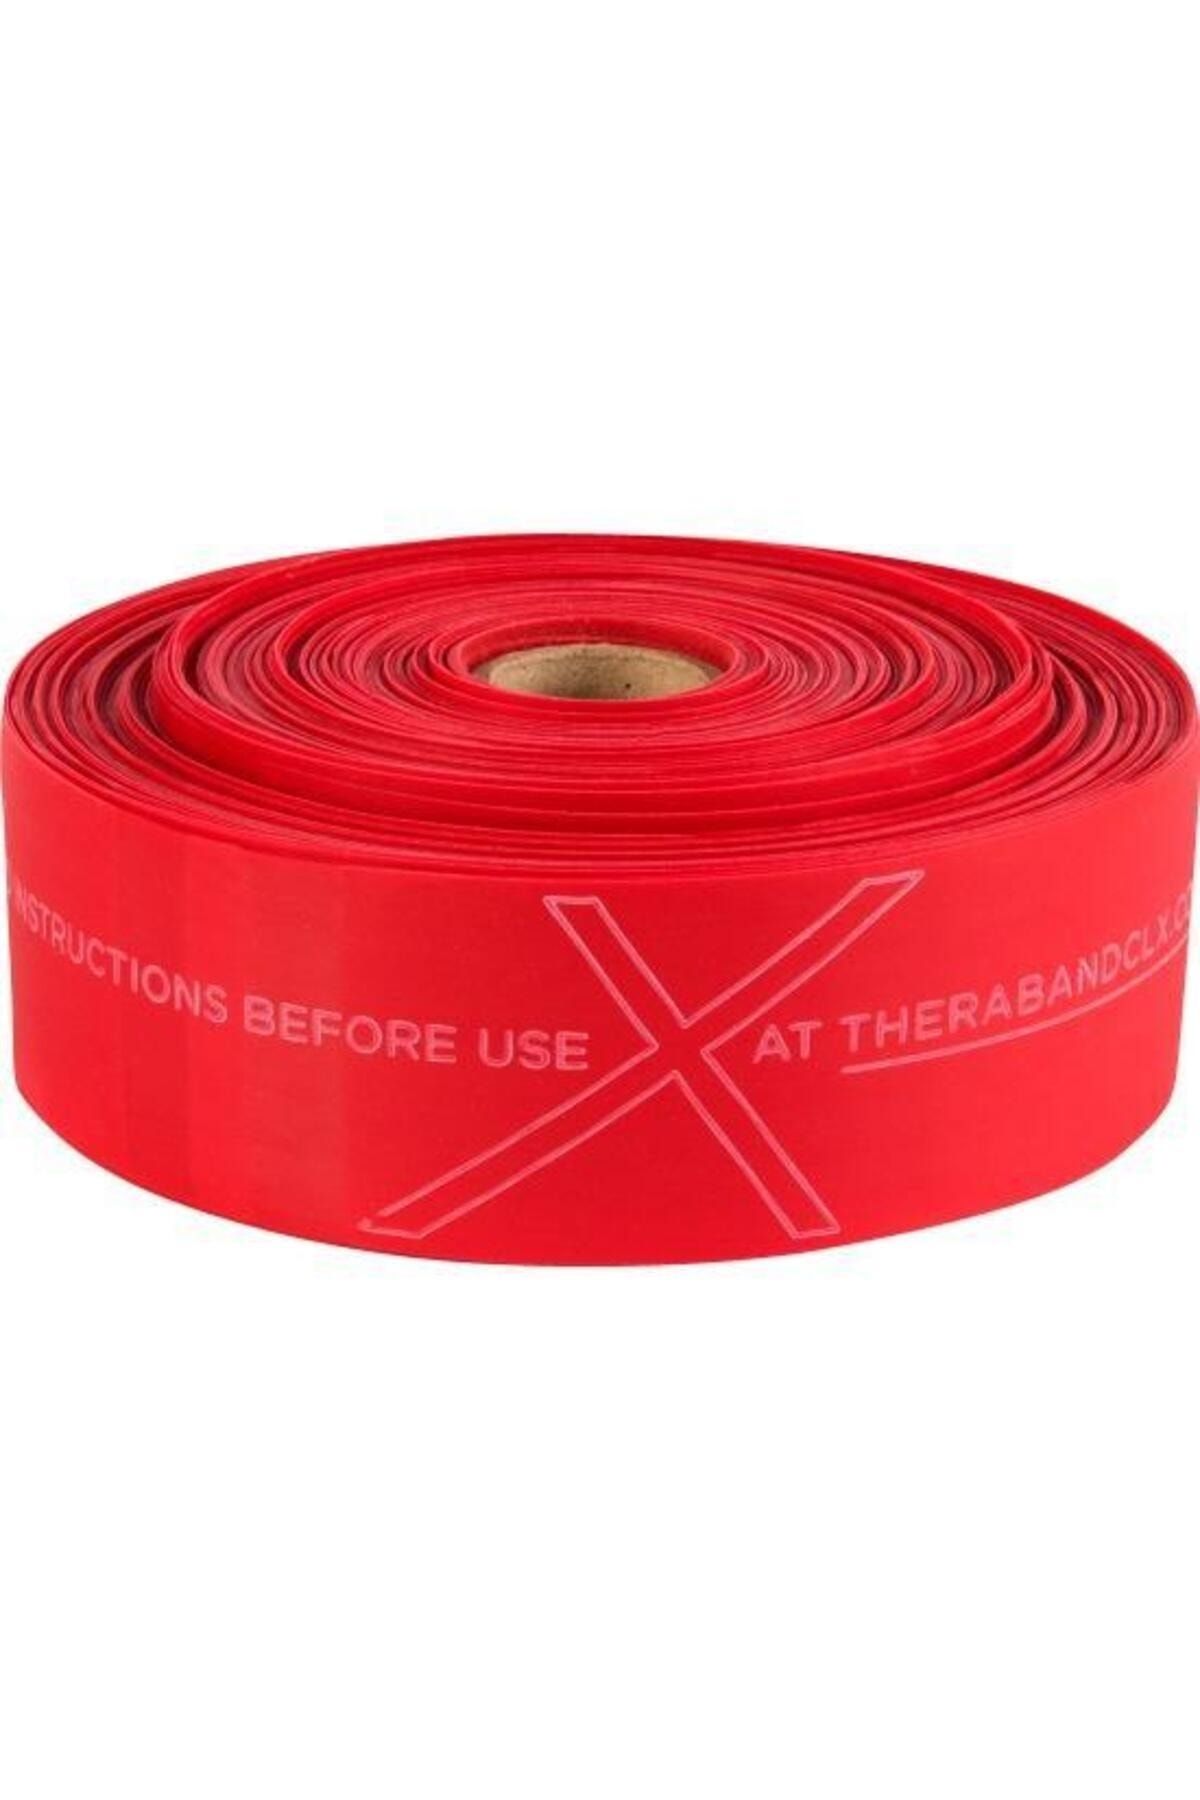 Theraband CLX RED 25YD BULK INT'L BAND